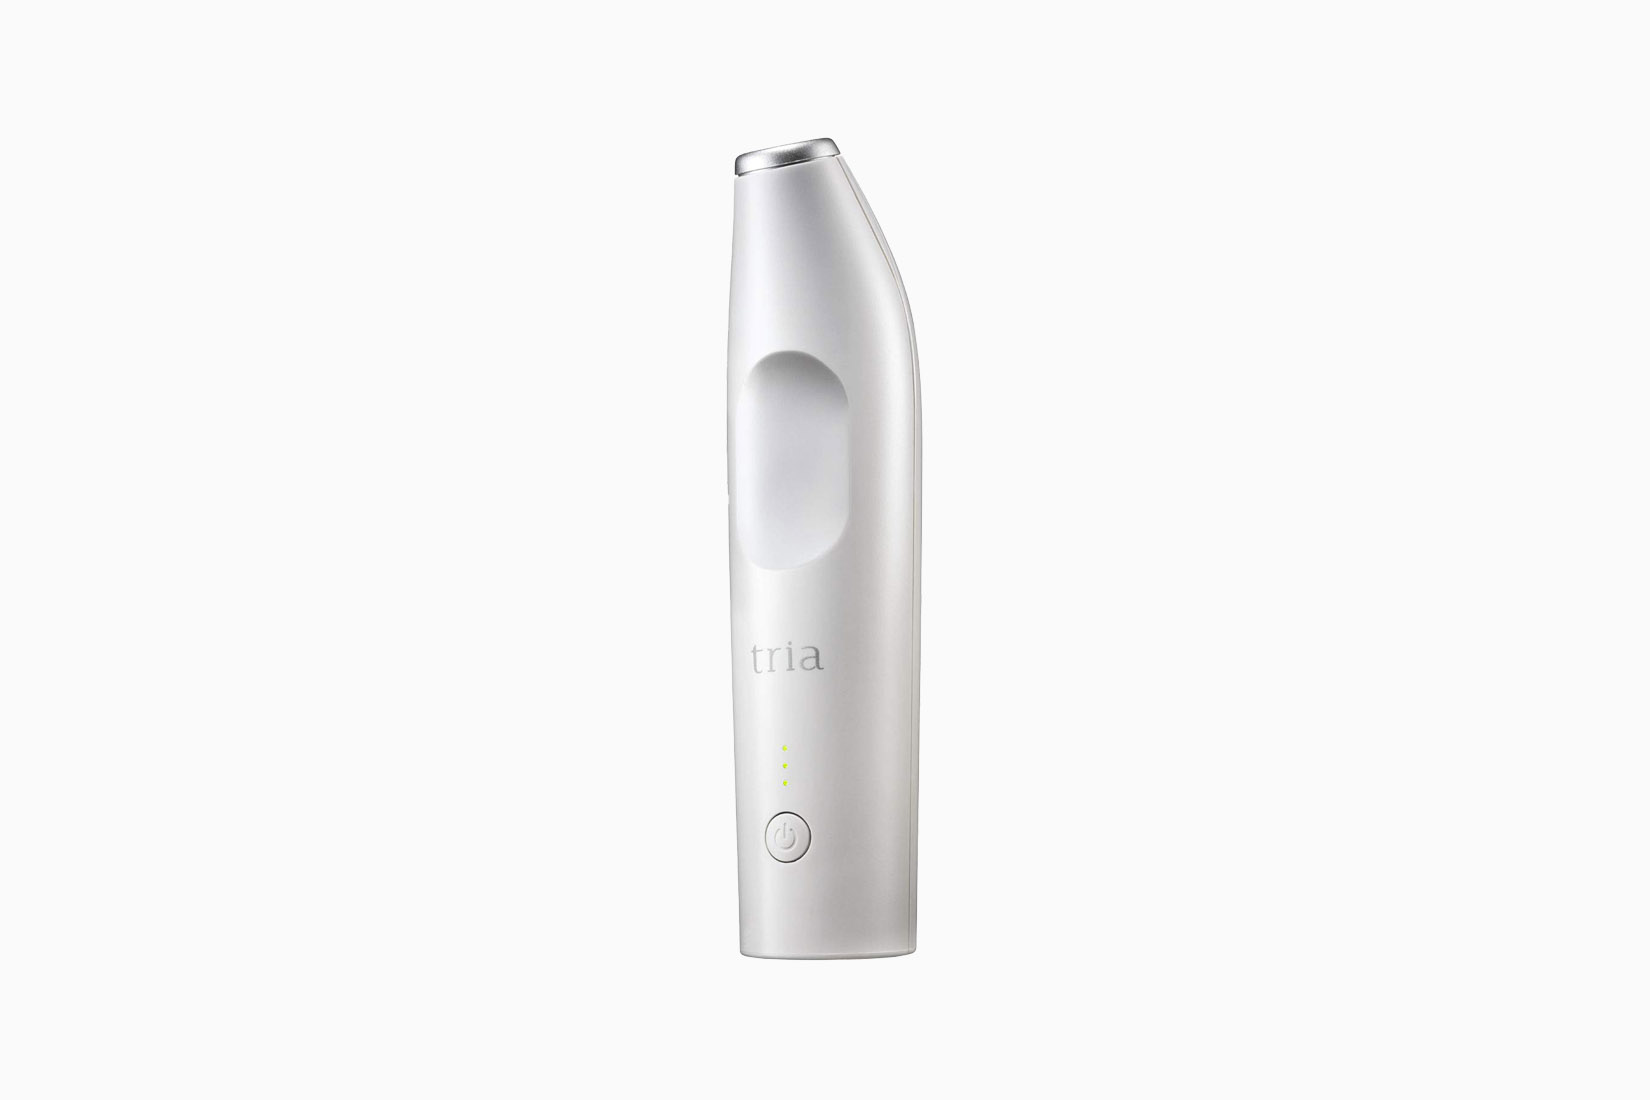 best ipl hair removal tria review Luxe Digital